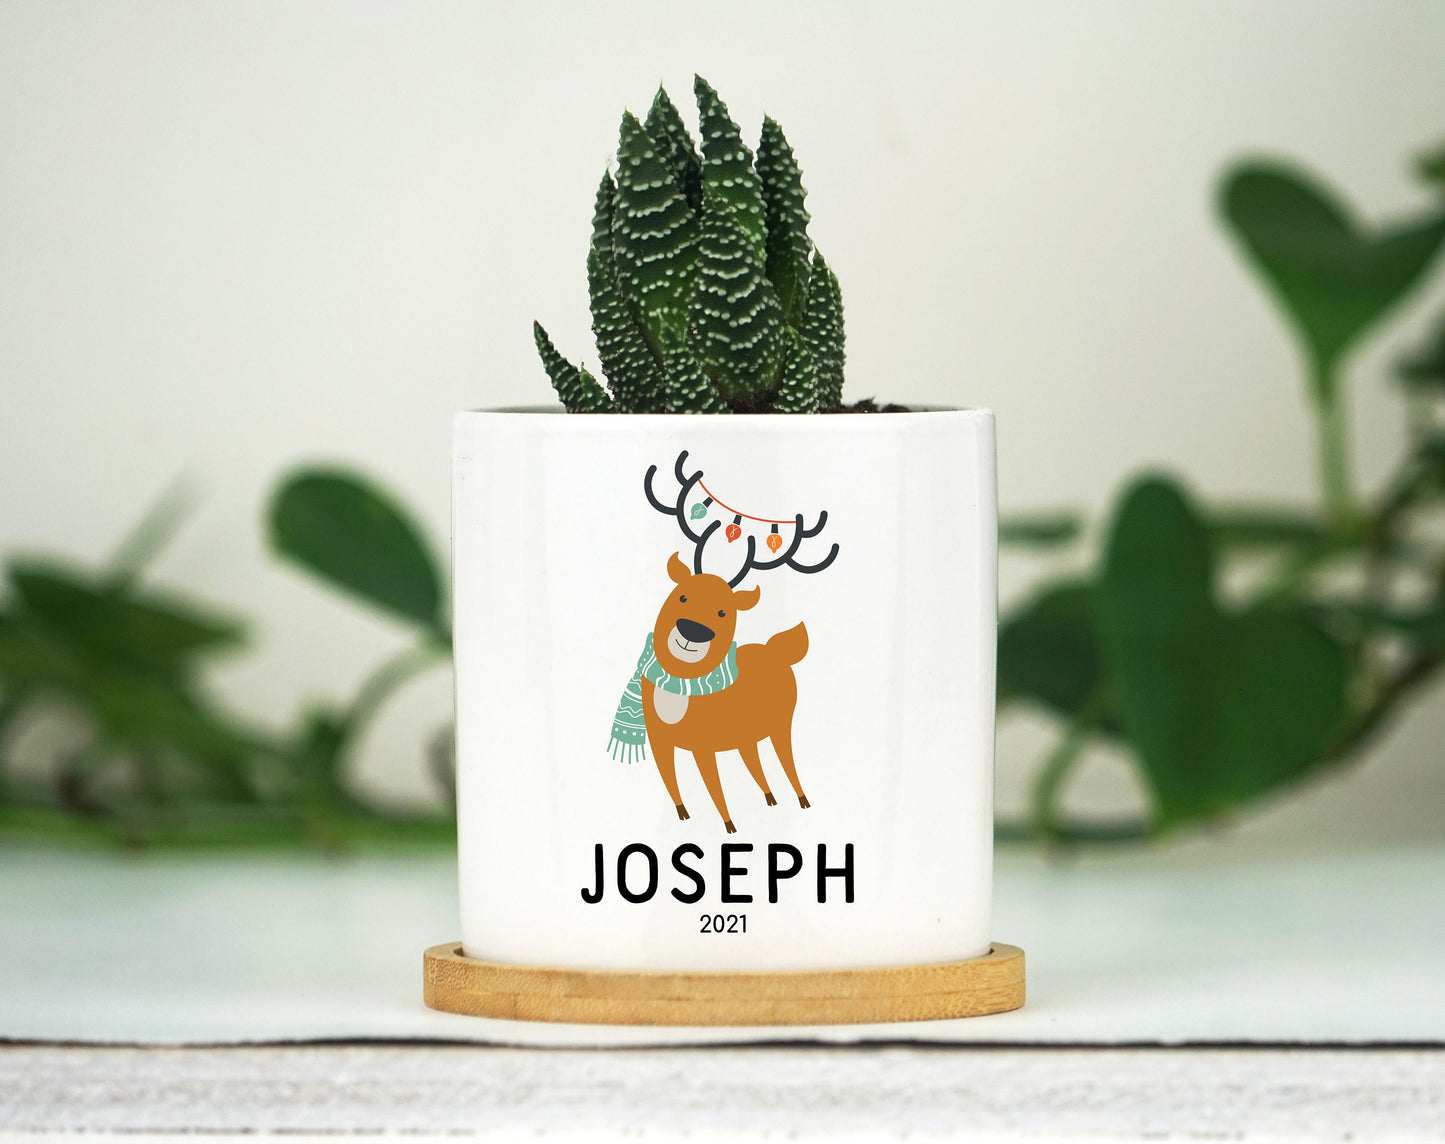 Personalized Christmas Baby Name Planter - 3" White Ceramic Pot w/ Bamboo Tray - New Baby Gift - Kids Name Gift Box - Baby Announcement